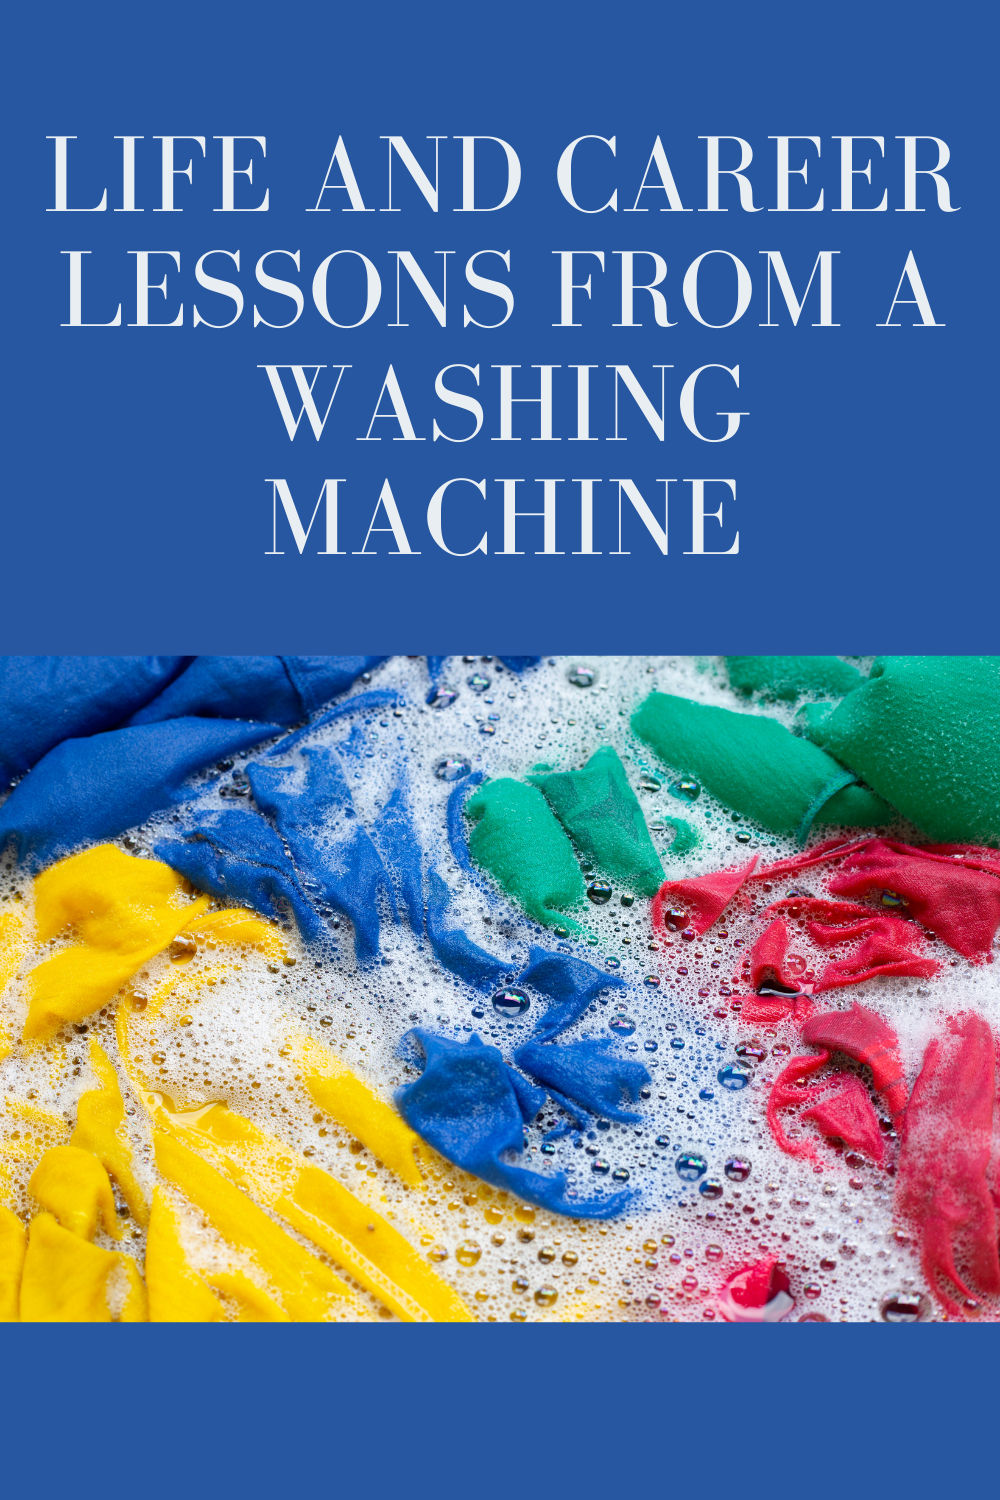 Life and career lessons from a washing machine